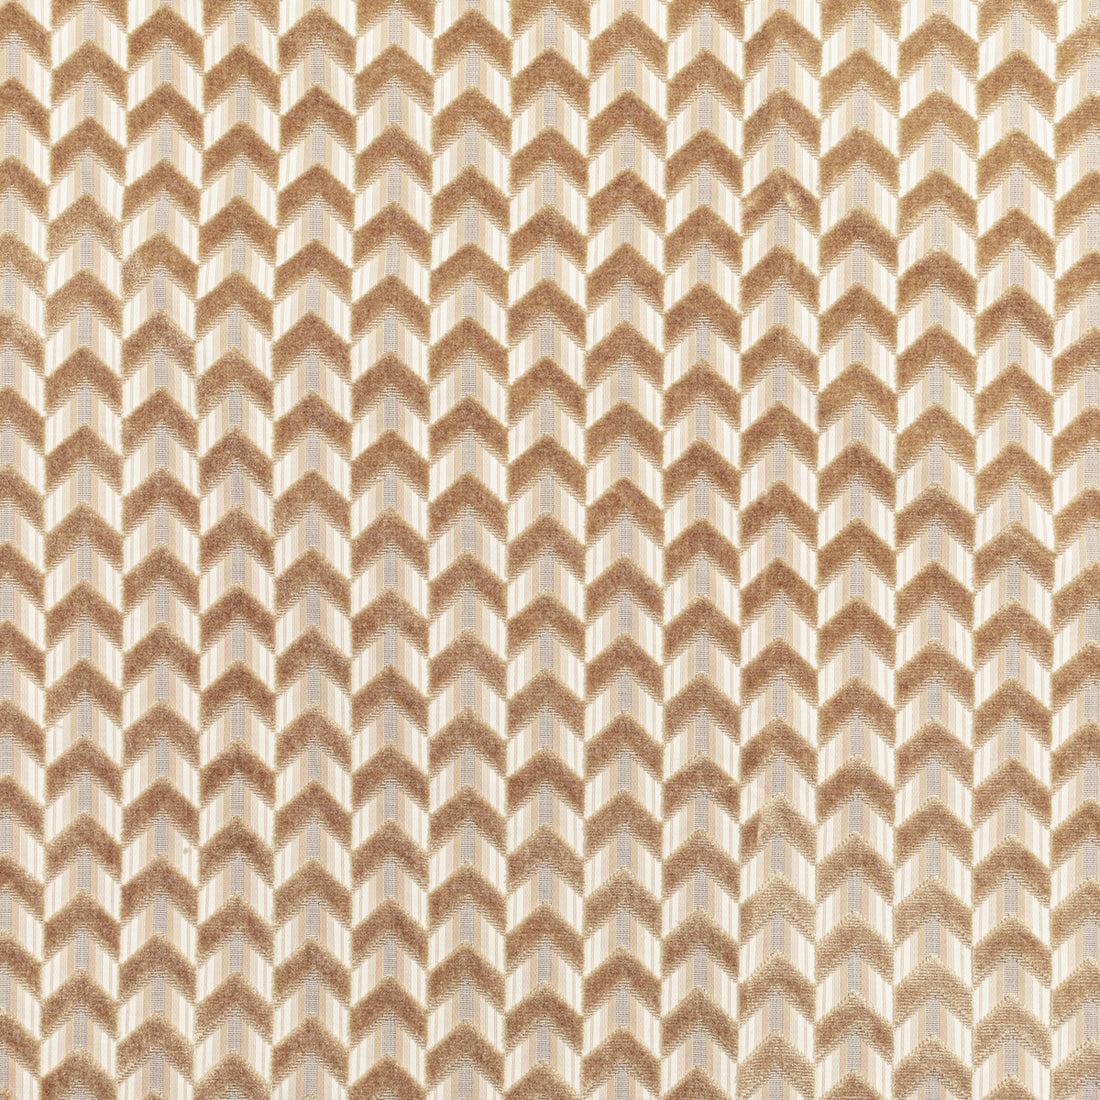 Bailey Velvet fabric in sand color - pattern 2020207.164.0 - by Lee Jofa in the Breckenridge collection